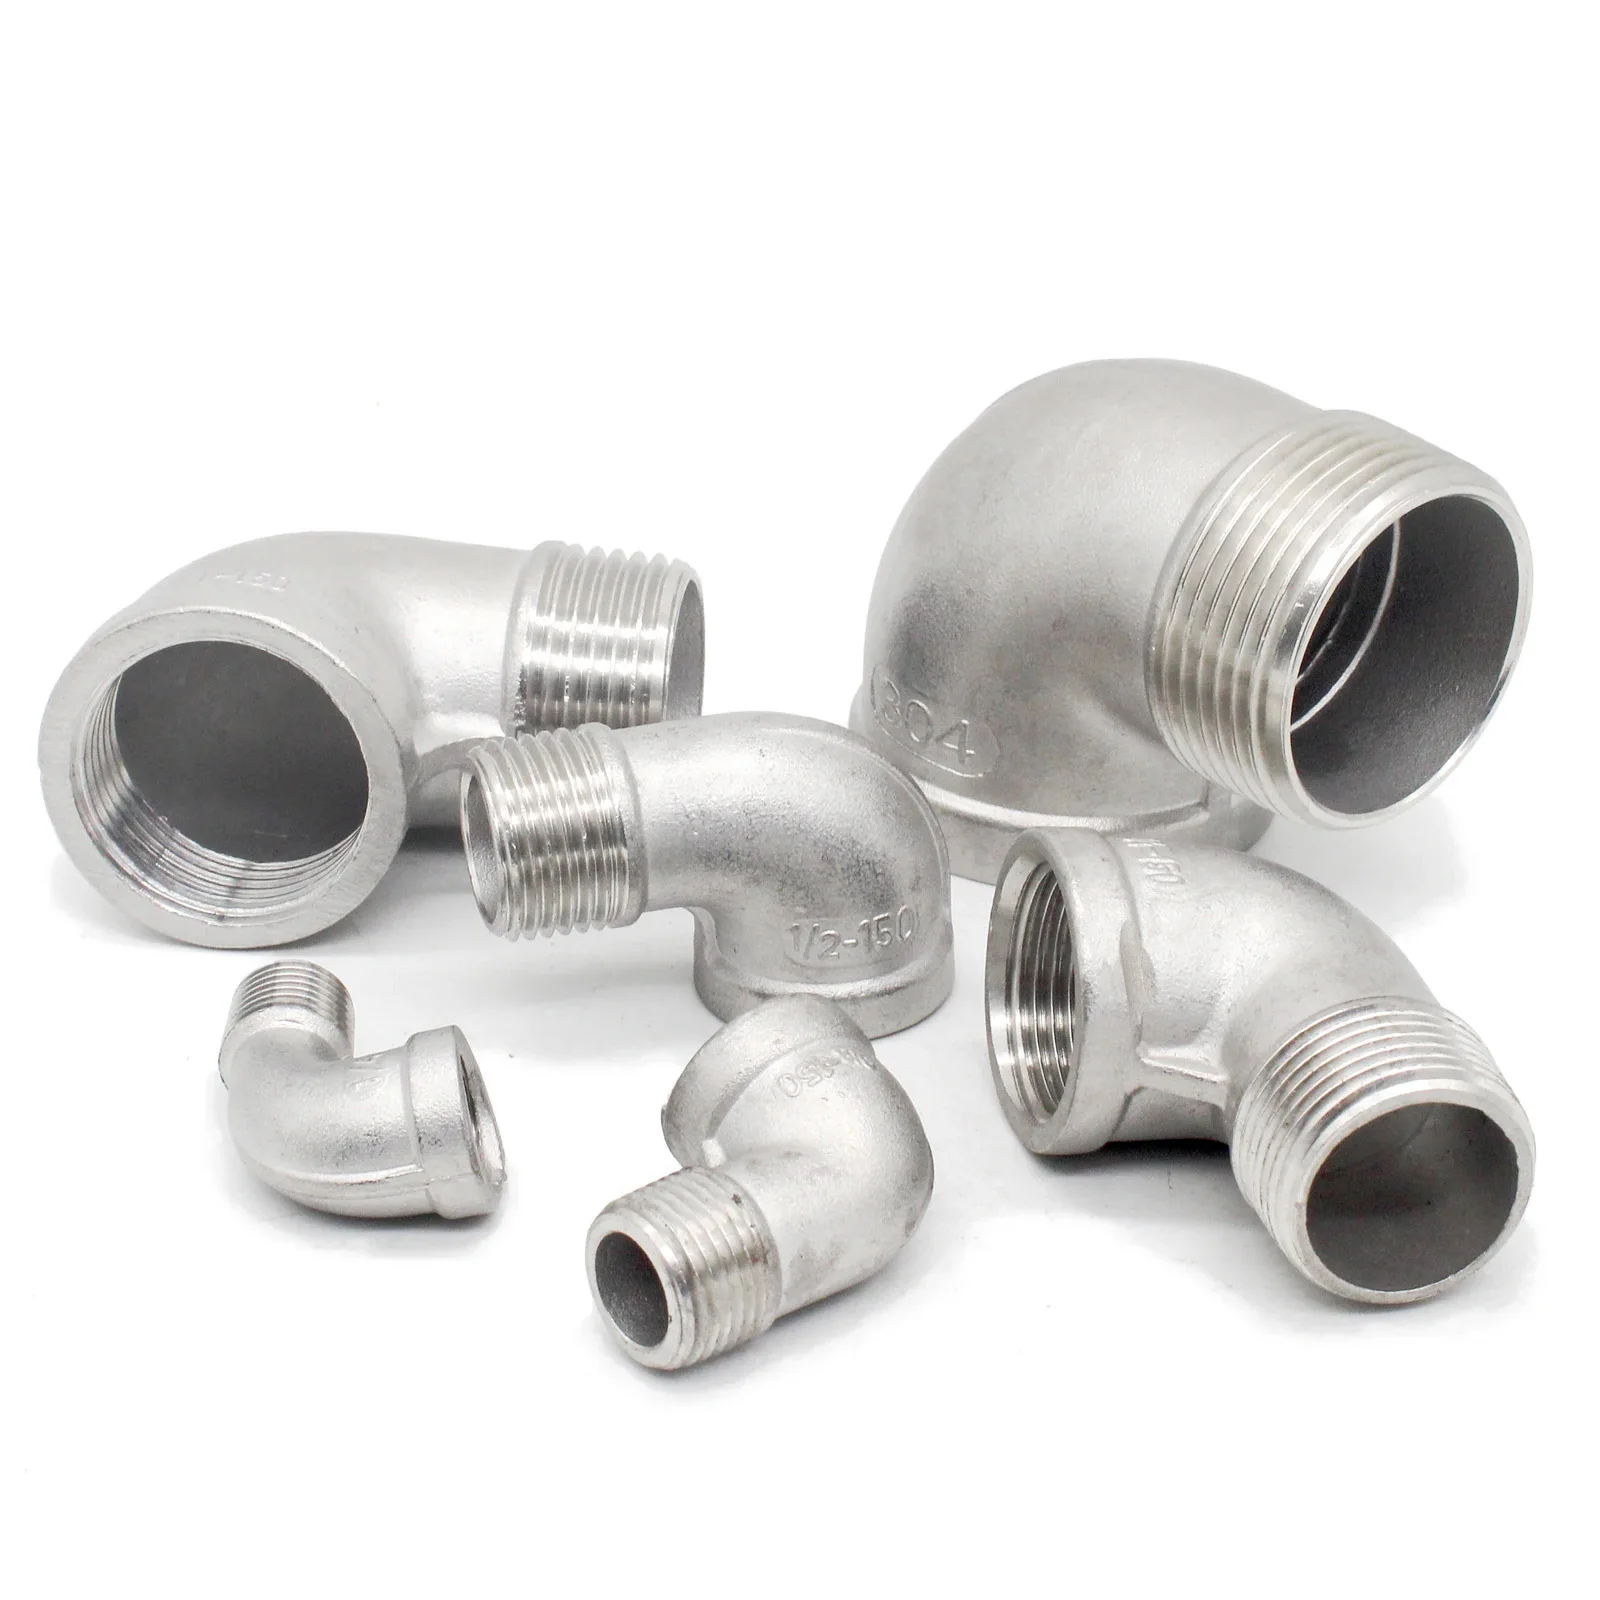 

Elbow 90 Degree Angled SS304 Male x Female Threaded Pipe Fittings Elbow Threaded connection Adapter1/4"3/8" 1/2" 3/4"1" 1-1/2"